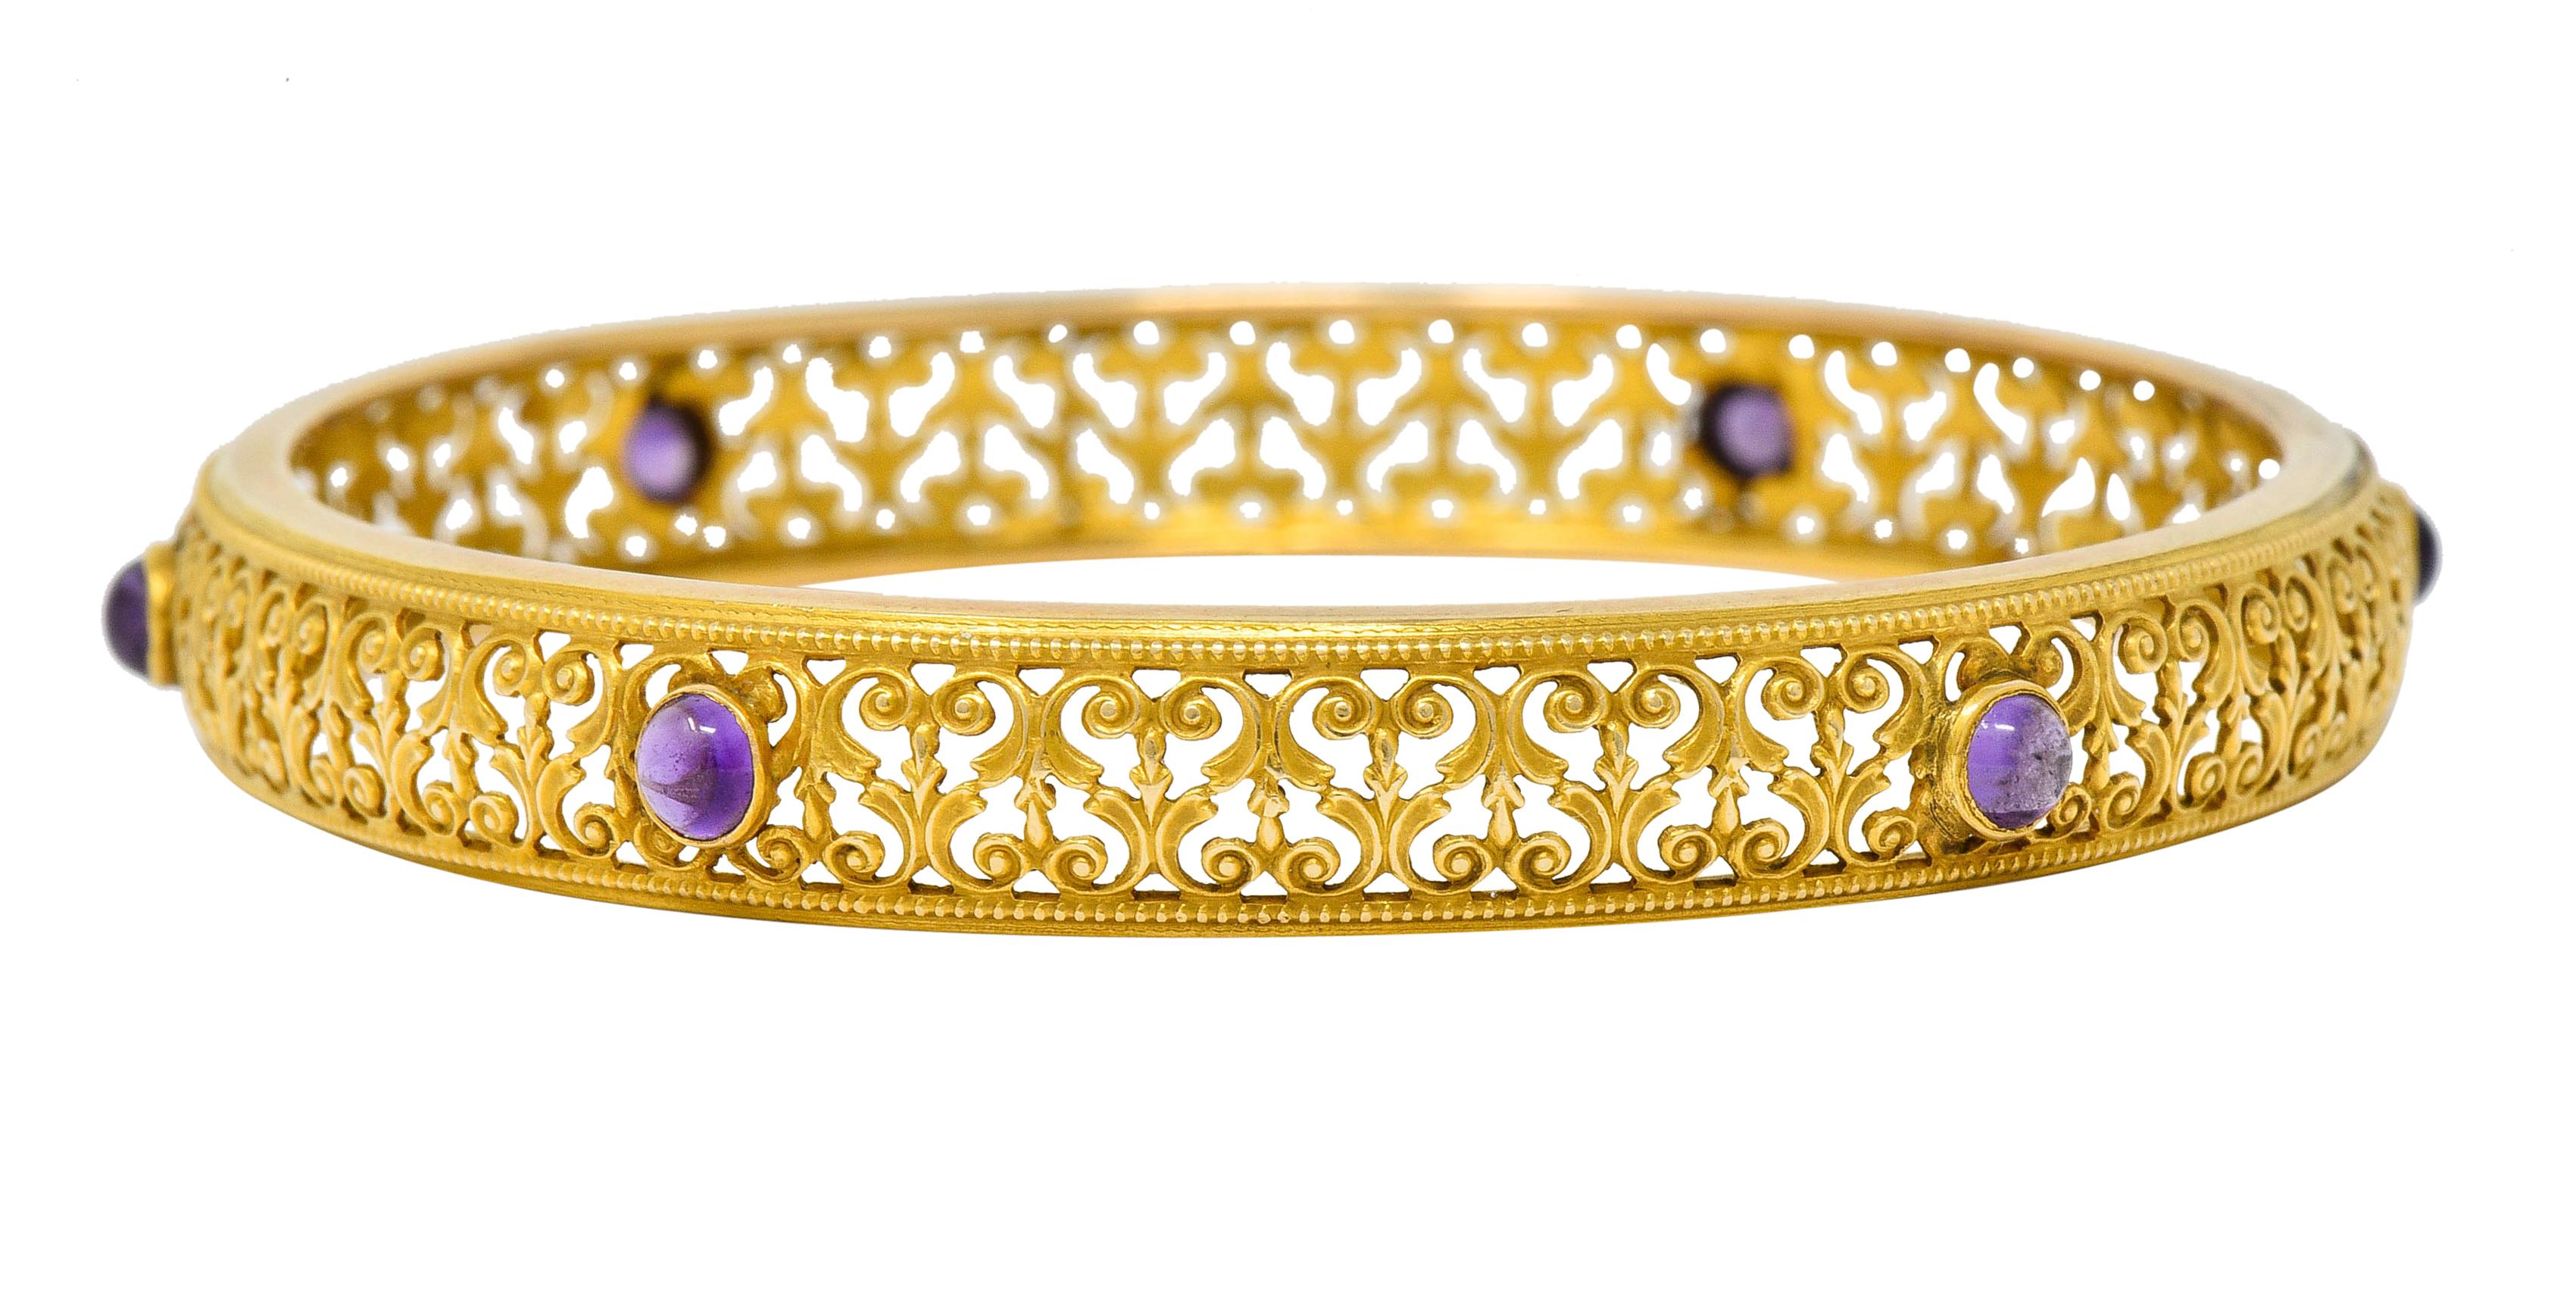 Bangle style bracelet with milgrain edges and a pierced scrolled filigree design

Accented by bezel set round amethyst cabochon measuring approximately 3.5 mm

Very well-matched medium-light purple in color

Tested as 14 karat gold

Circa: